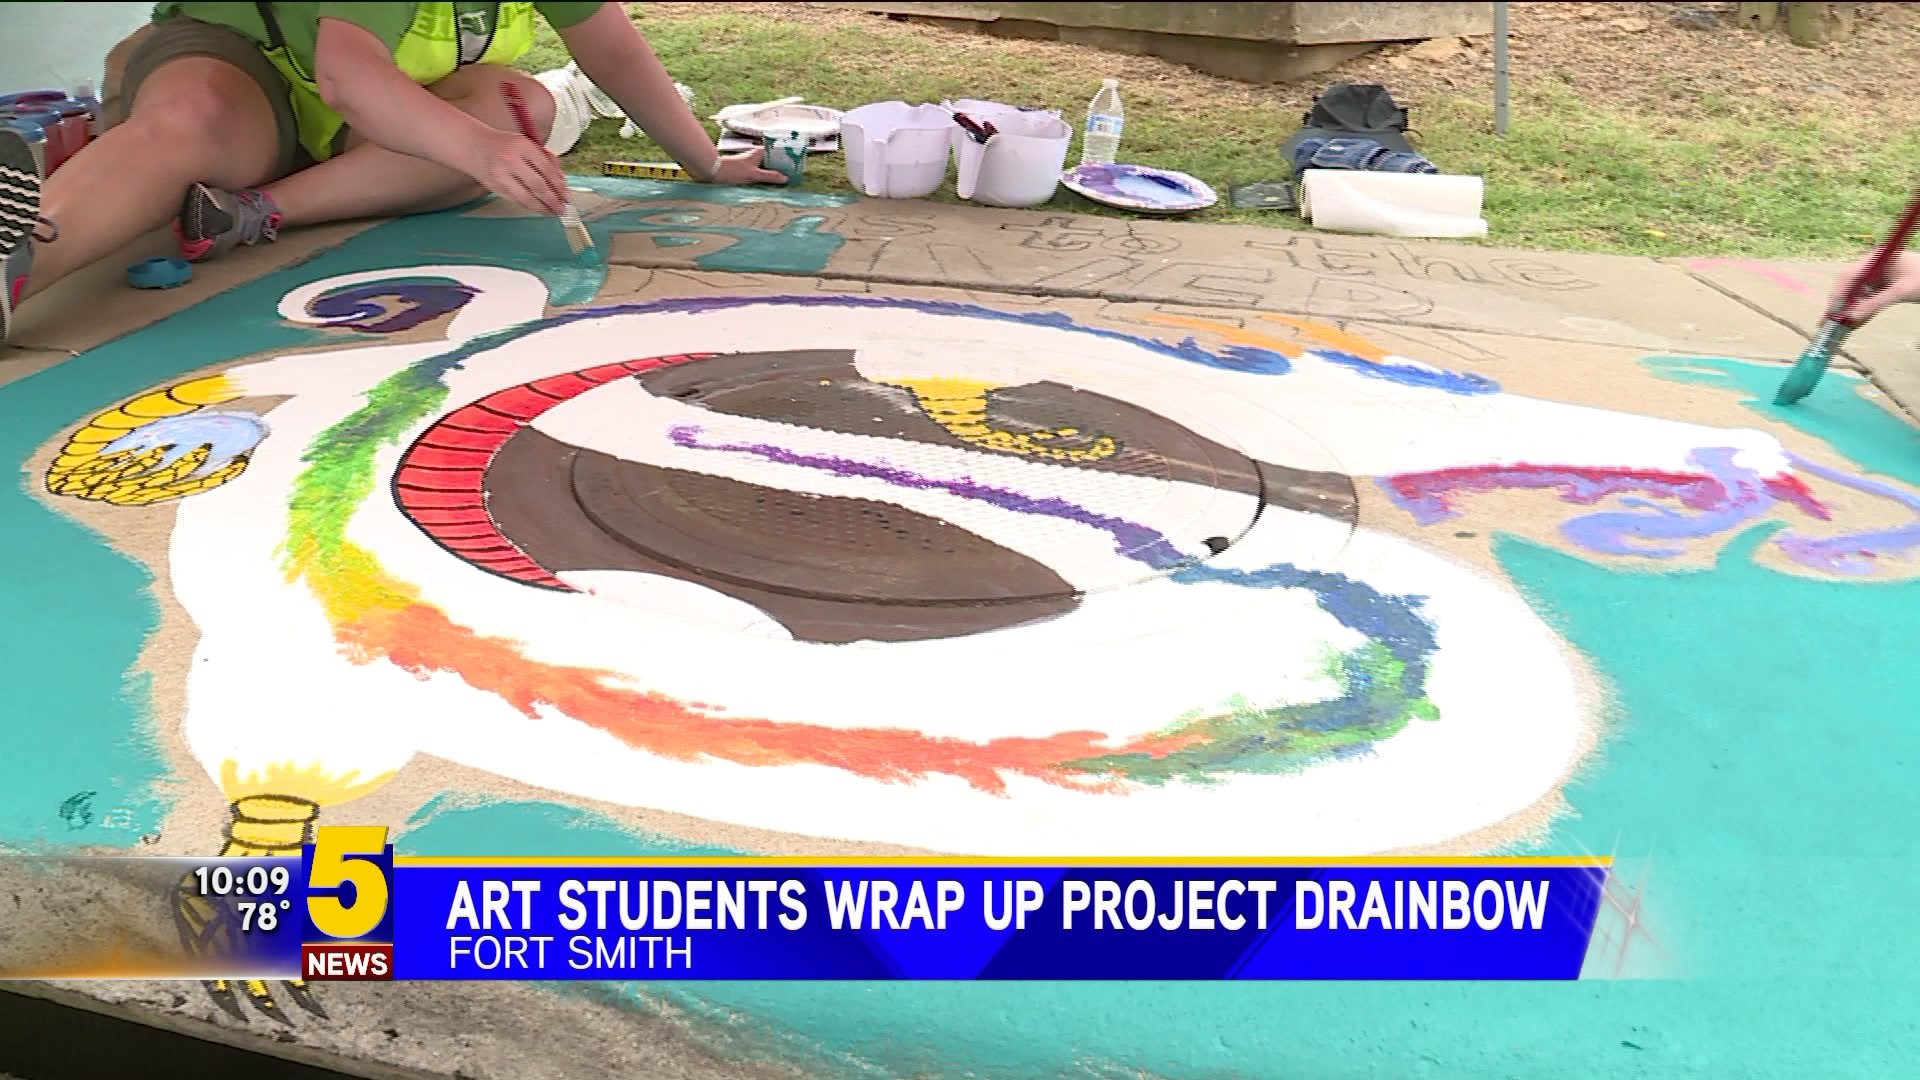 Arts Students Wrap Up Project Drainbow